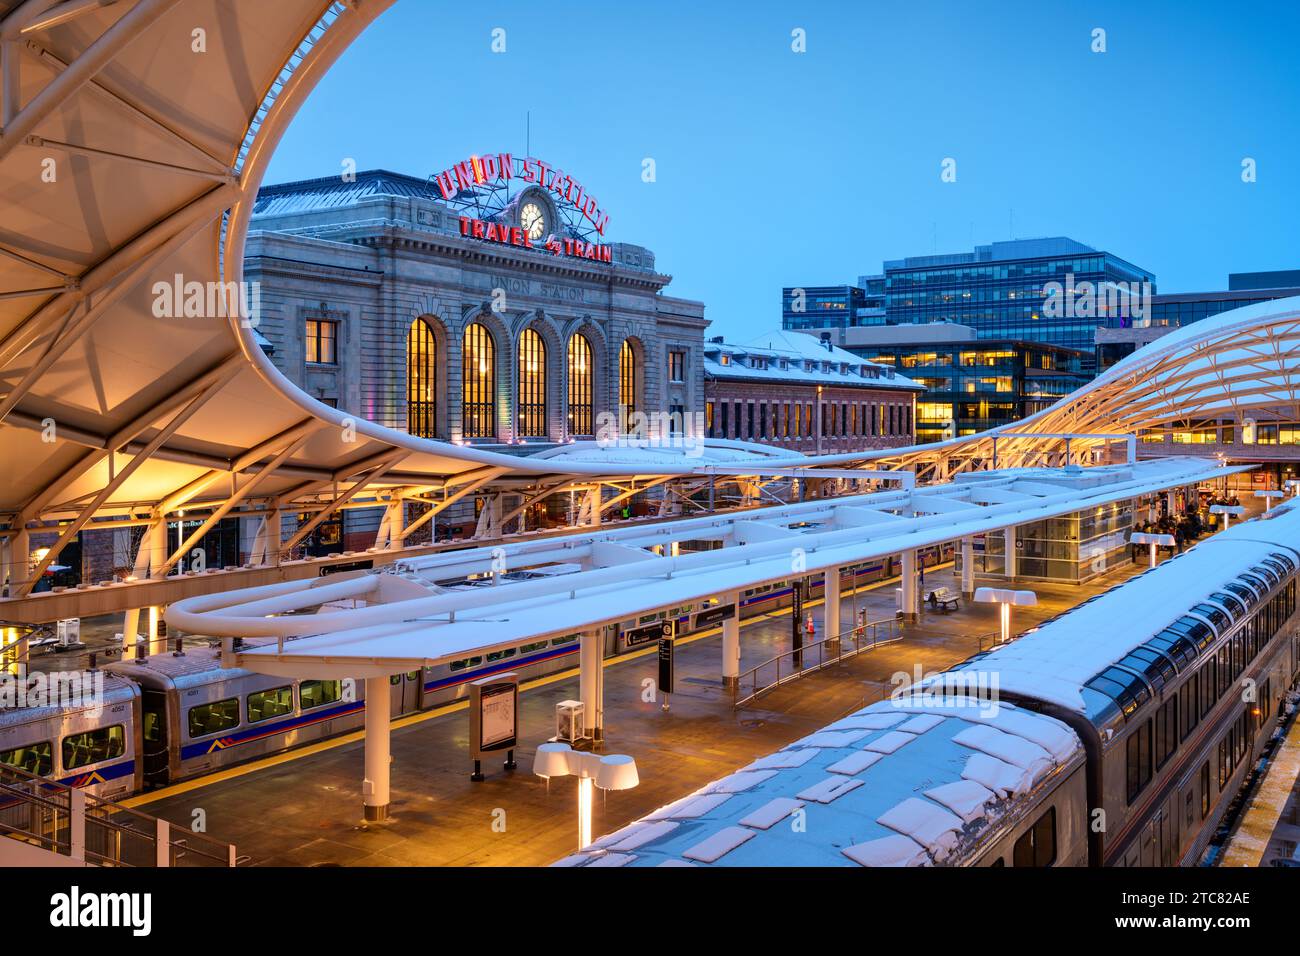 DENVER, COLORADO - MARCH 13, 2019: Trains out of service at Union Station after the 'Bomb Cyclone' winter weather event. The central portion of the st Stock Photo